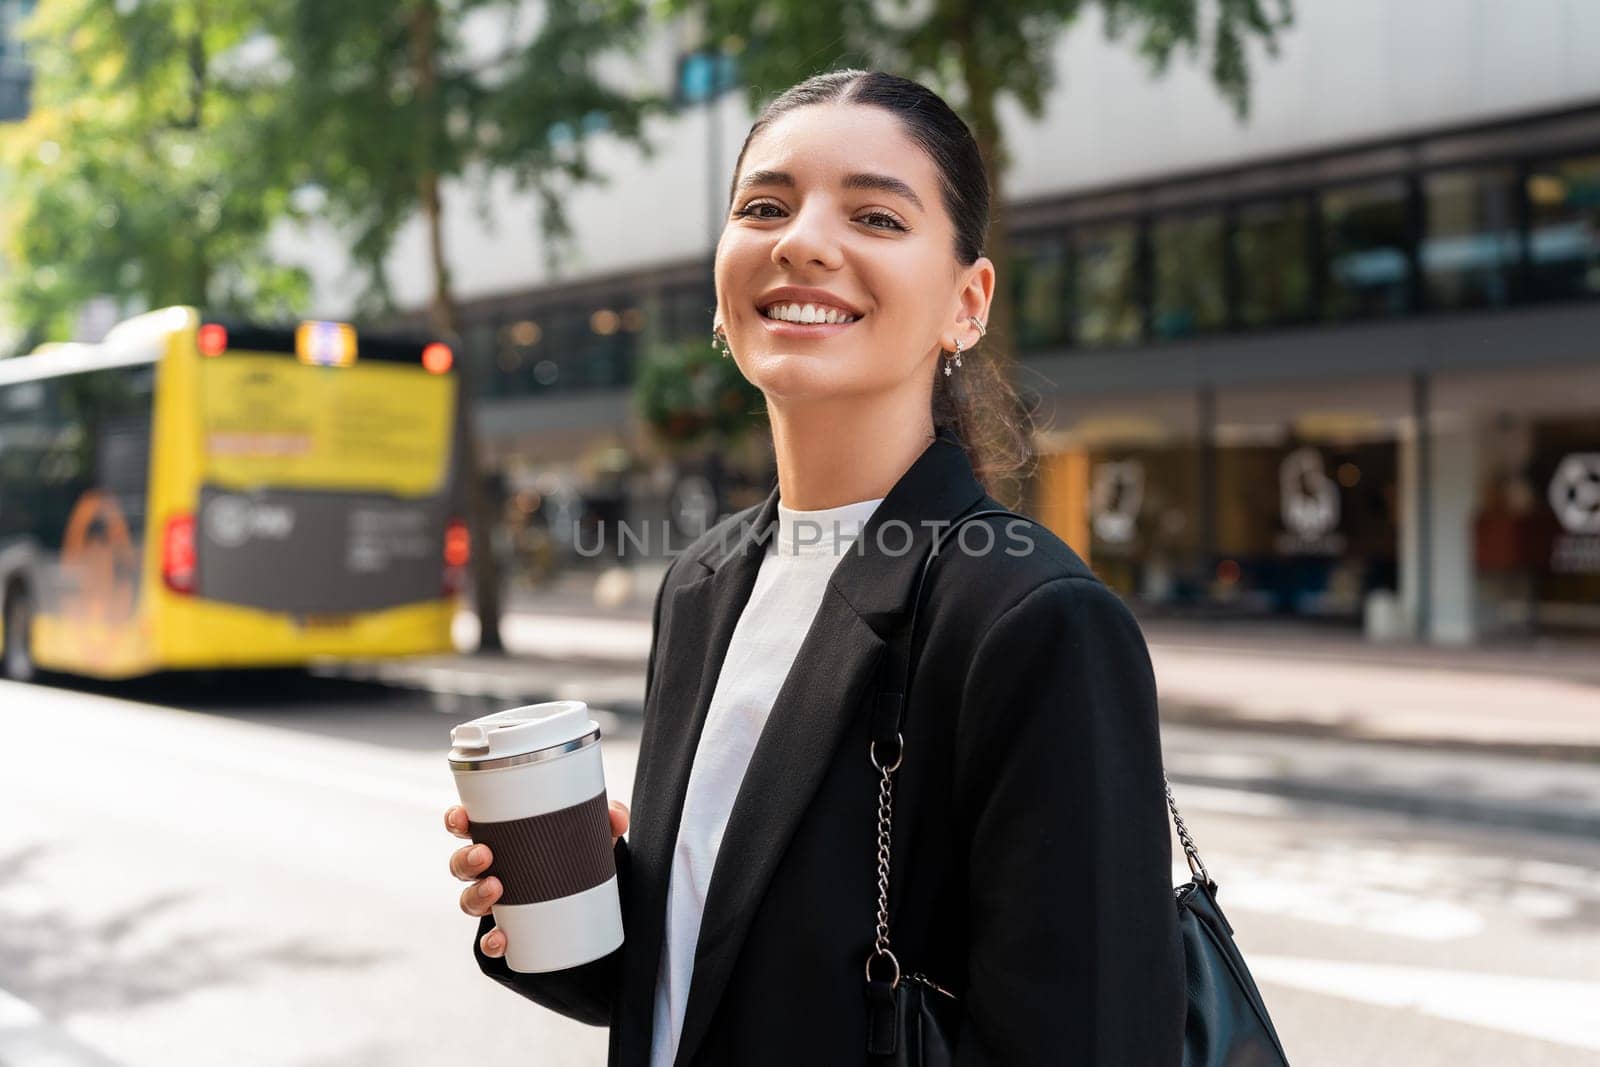 Ready for the day. Cheerful multiracial businesswoman in city street holding a thermo mug by AndreiDavid